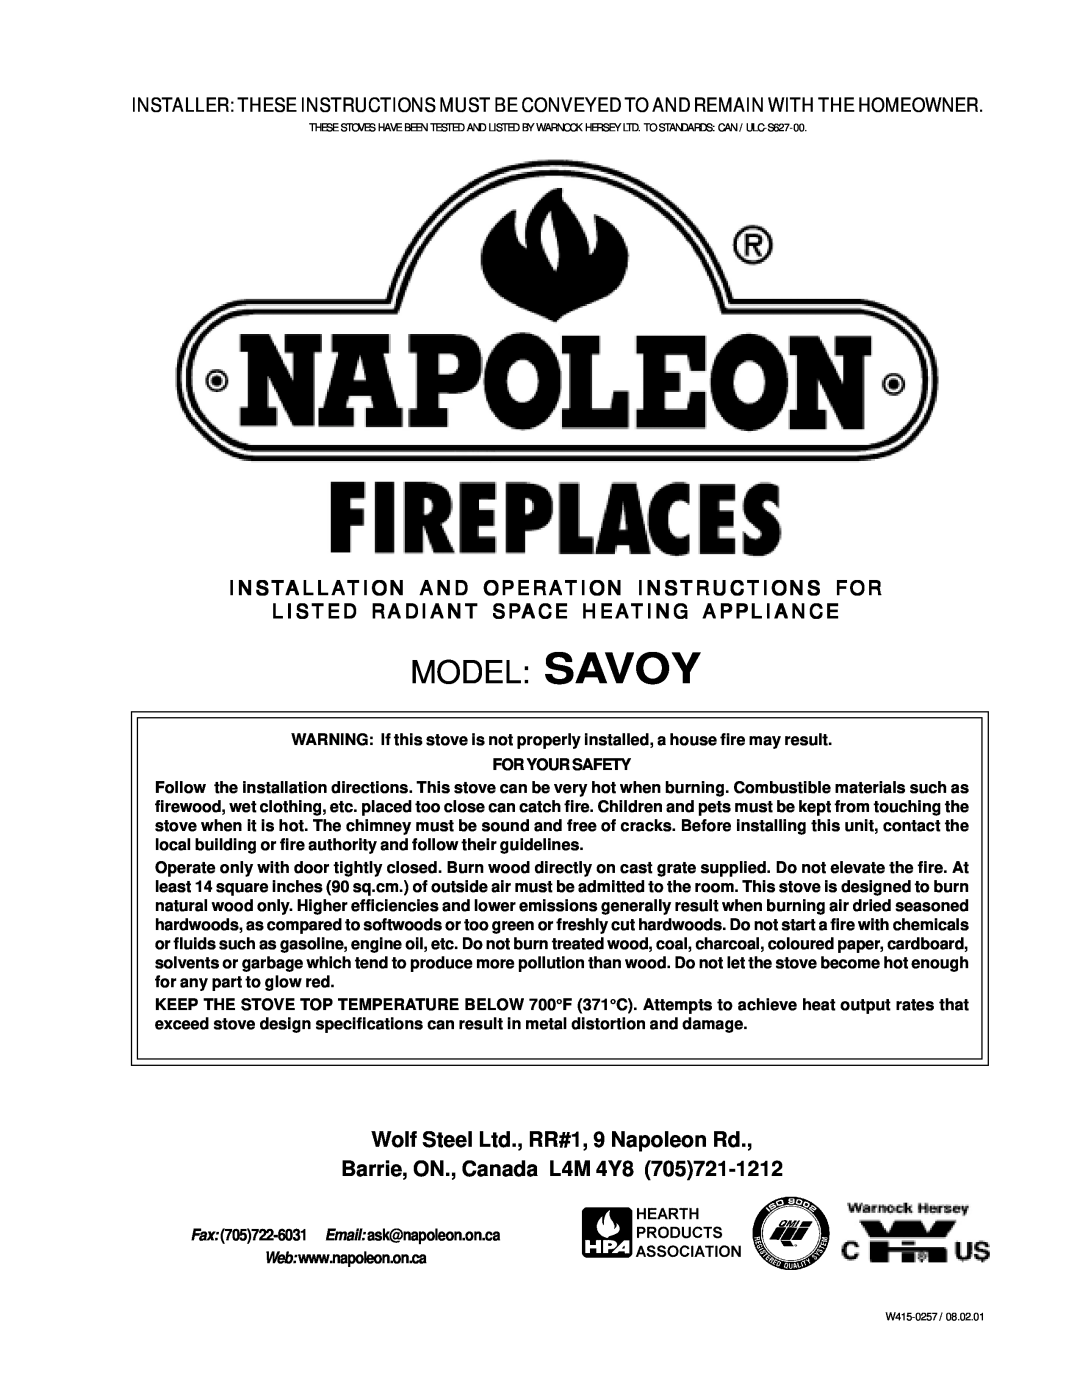 Napoleon Fireplaces manual Barrie, ON., Canada L4M 4Y8, Model Savoy, Installation And Operation Instructions For 